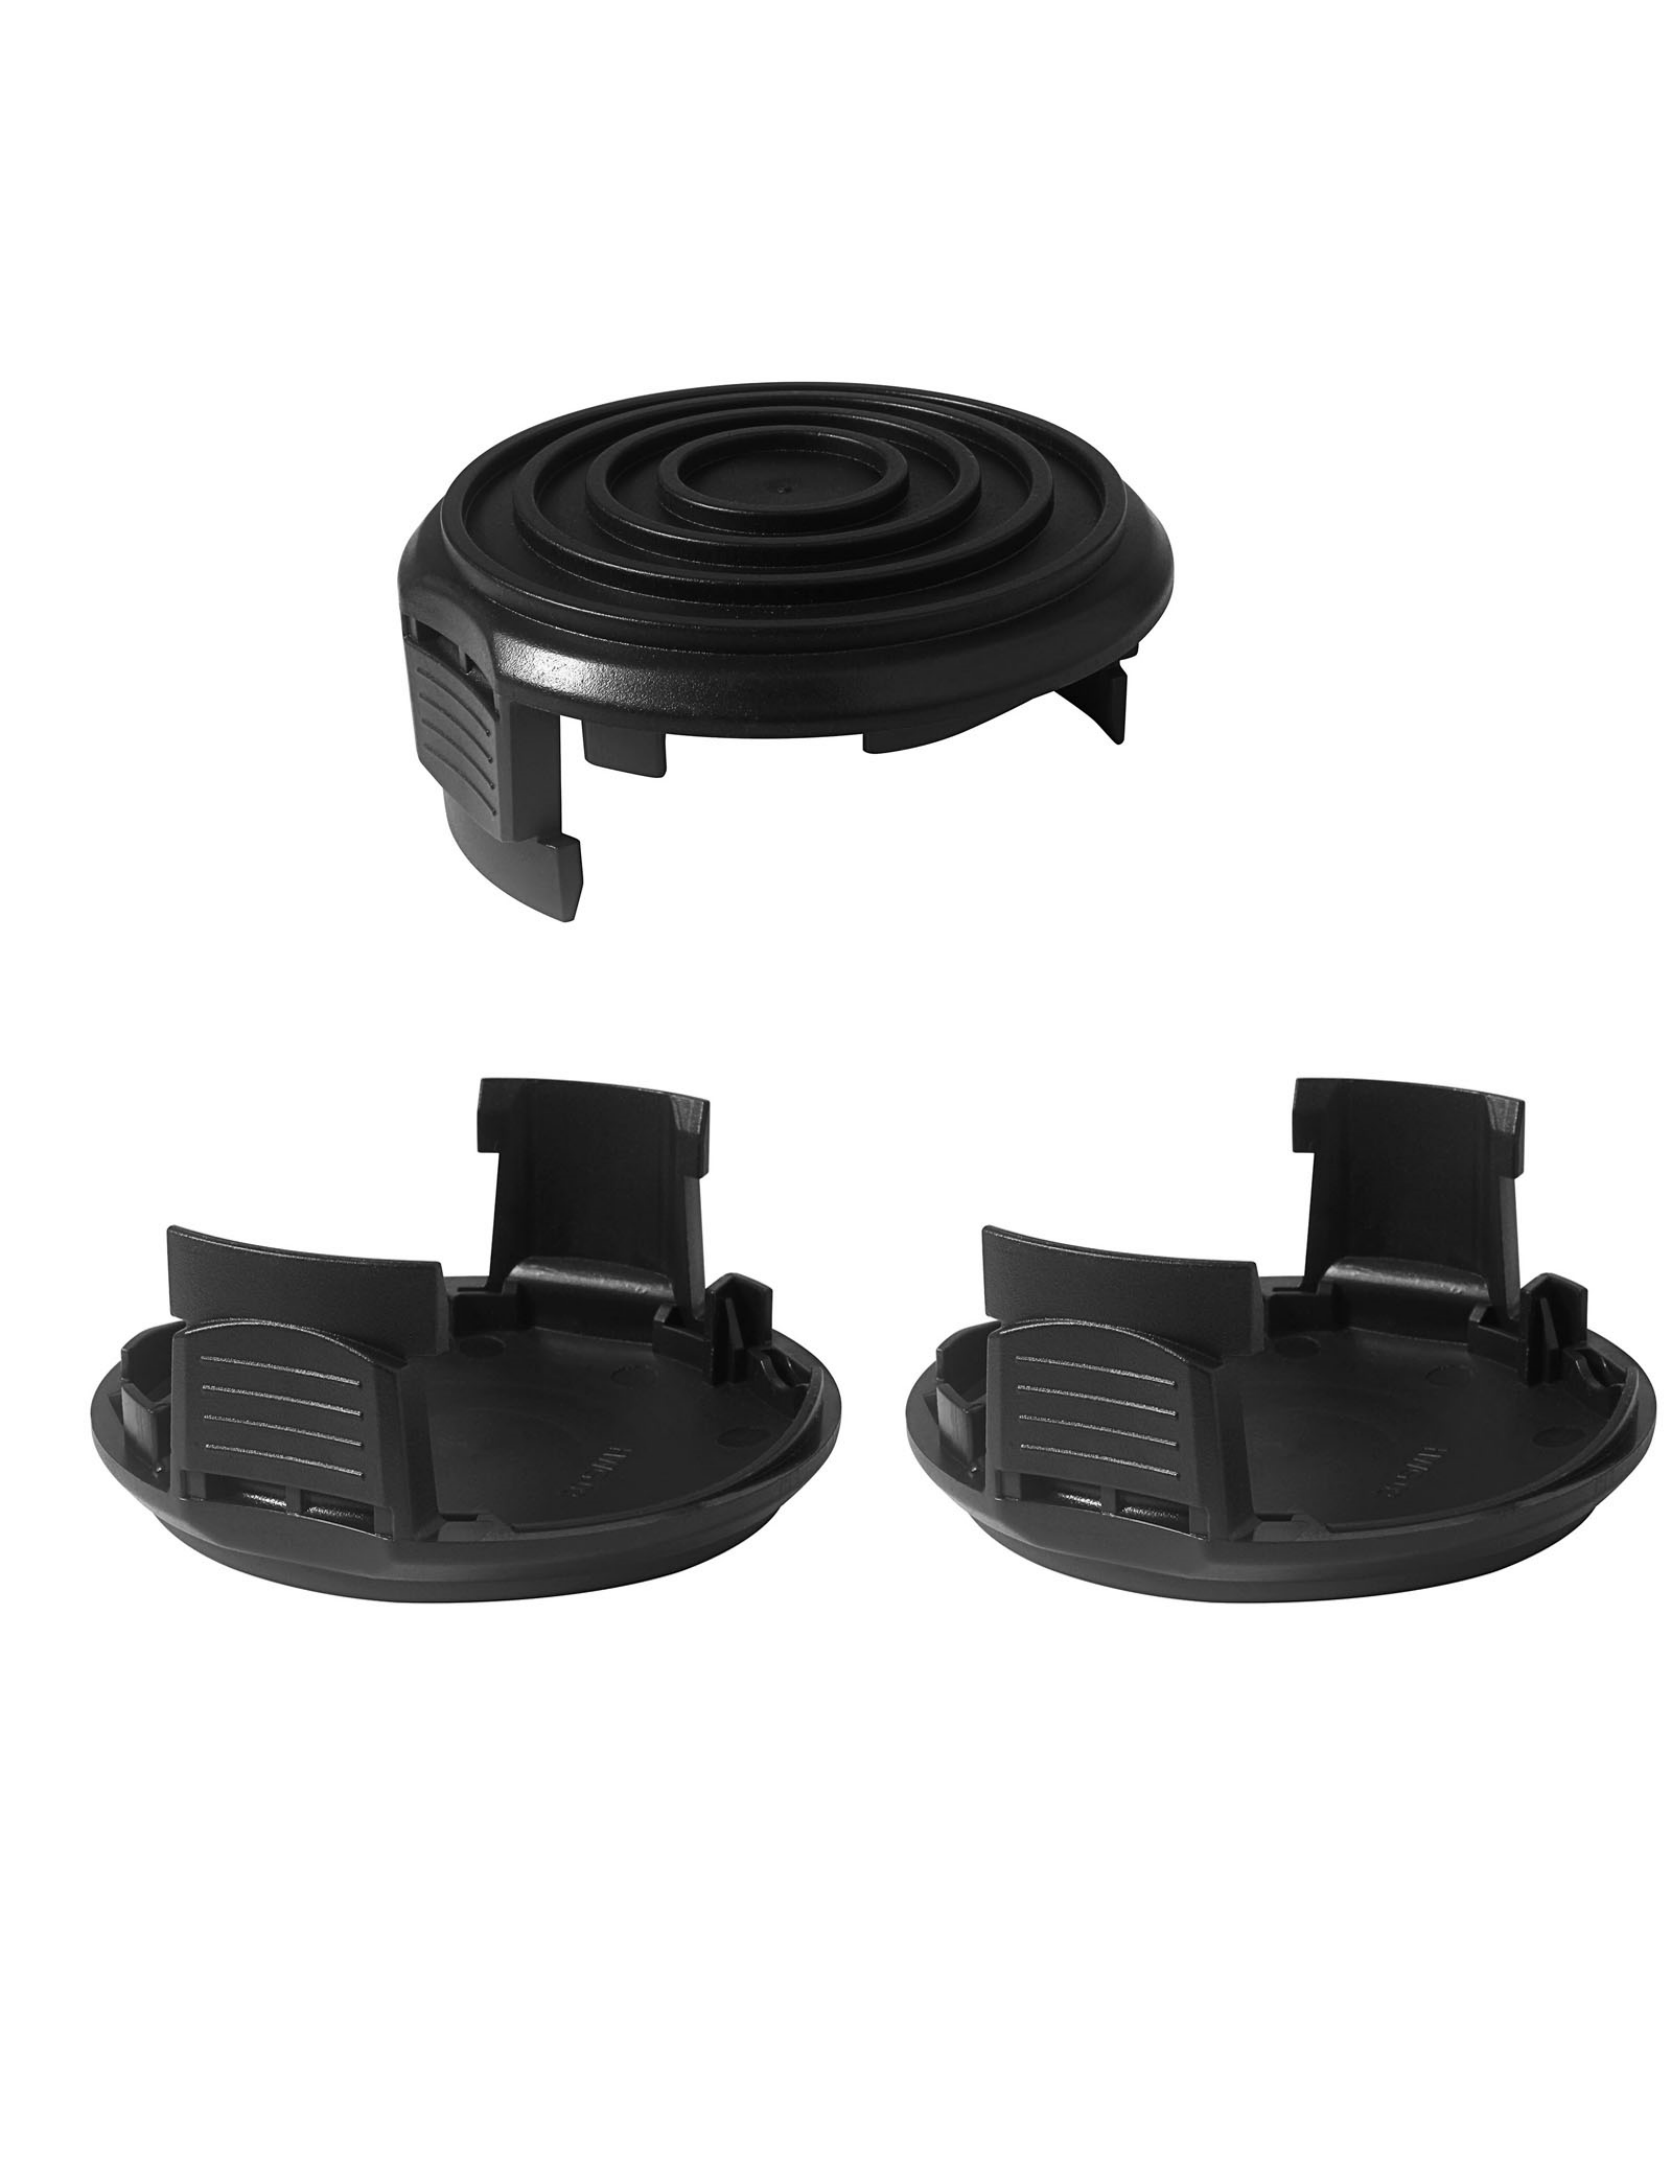 THTEN WA0014 Trimmer Replacement Spool Cap Covers Compatible with Worx WA0014 WG168 WG184 String Trimmers,WA0037 Cap Covers Weed Eater Spool Cap for Worx Parts 3 Pack